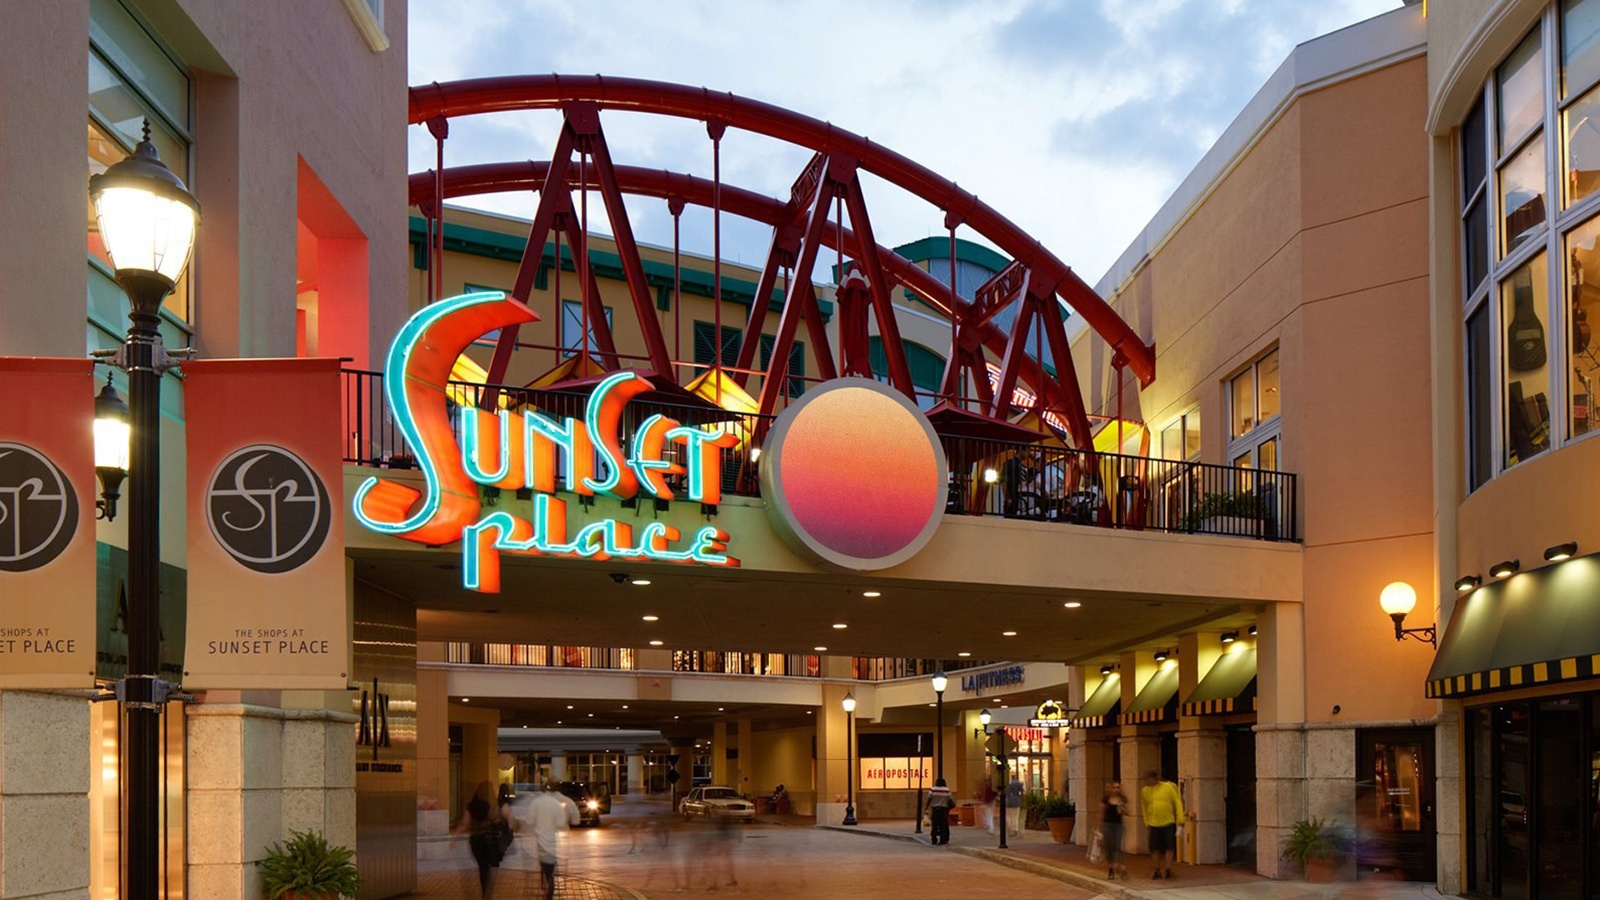 About Shops at Sunset Place